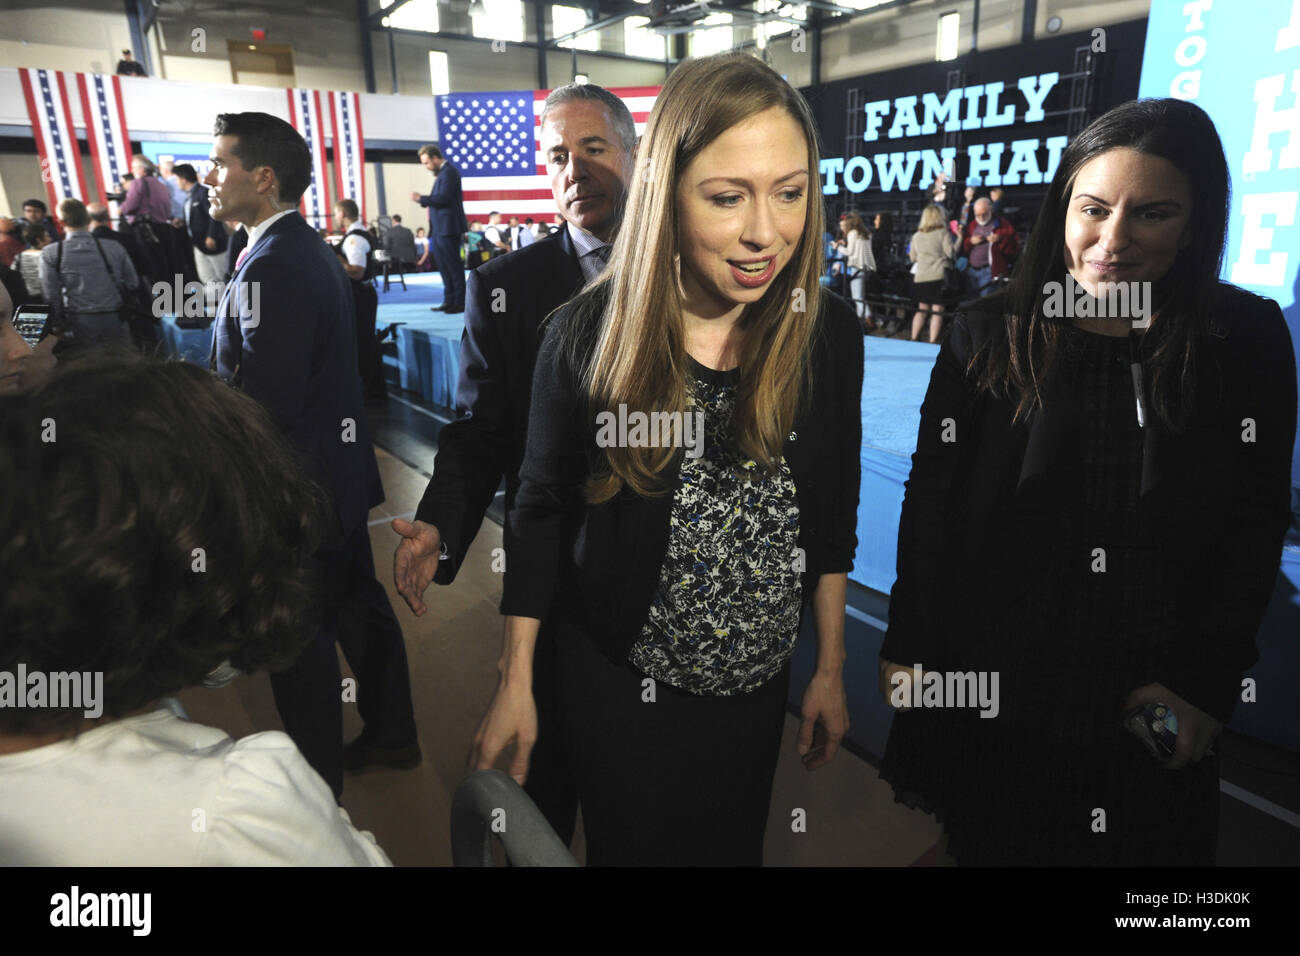 Haverford, USA. 4th Oct, 2016. Chelsea Clinton greets Hillary Clinton's supporters after a conversation with families about her agenda to support children and families and create an economy that works for everyone at Haverford Community Recreation & Environmental Center on October 4, 2016 in Haverford, USA. | Verwendung weltweit/picture alliance © dpa/Alamy Live News Stock Photo